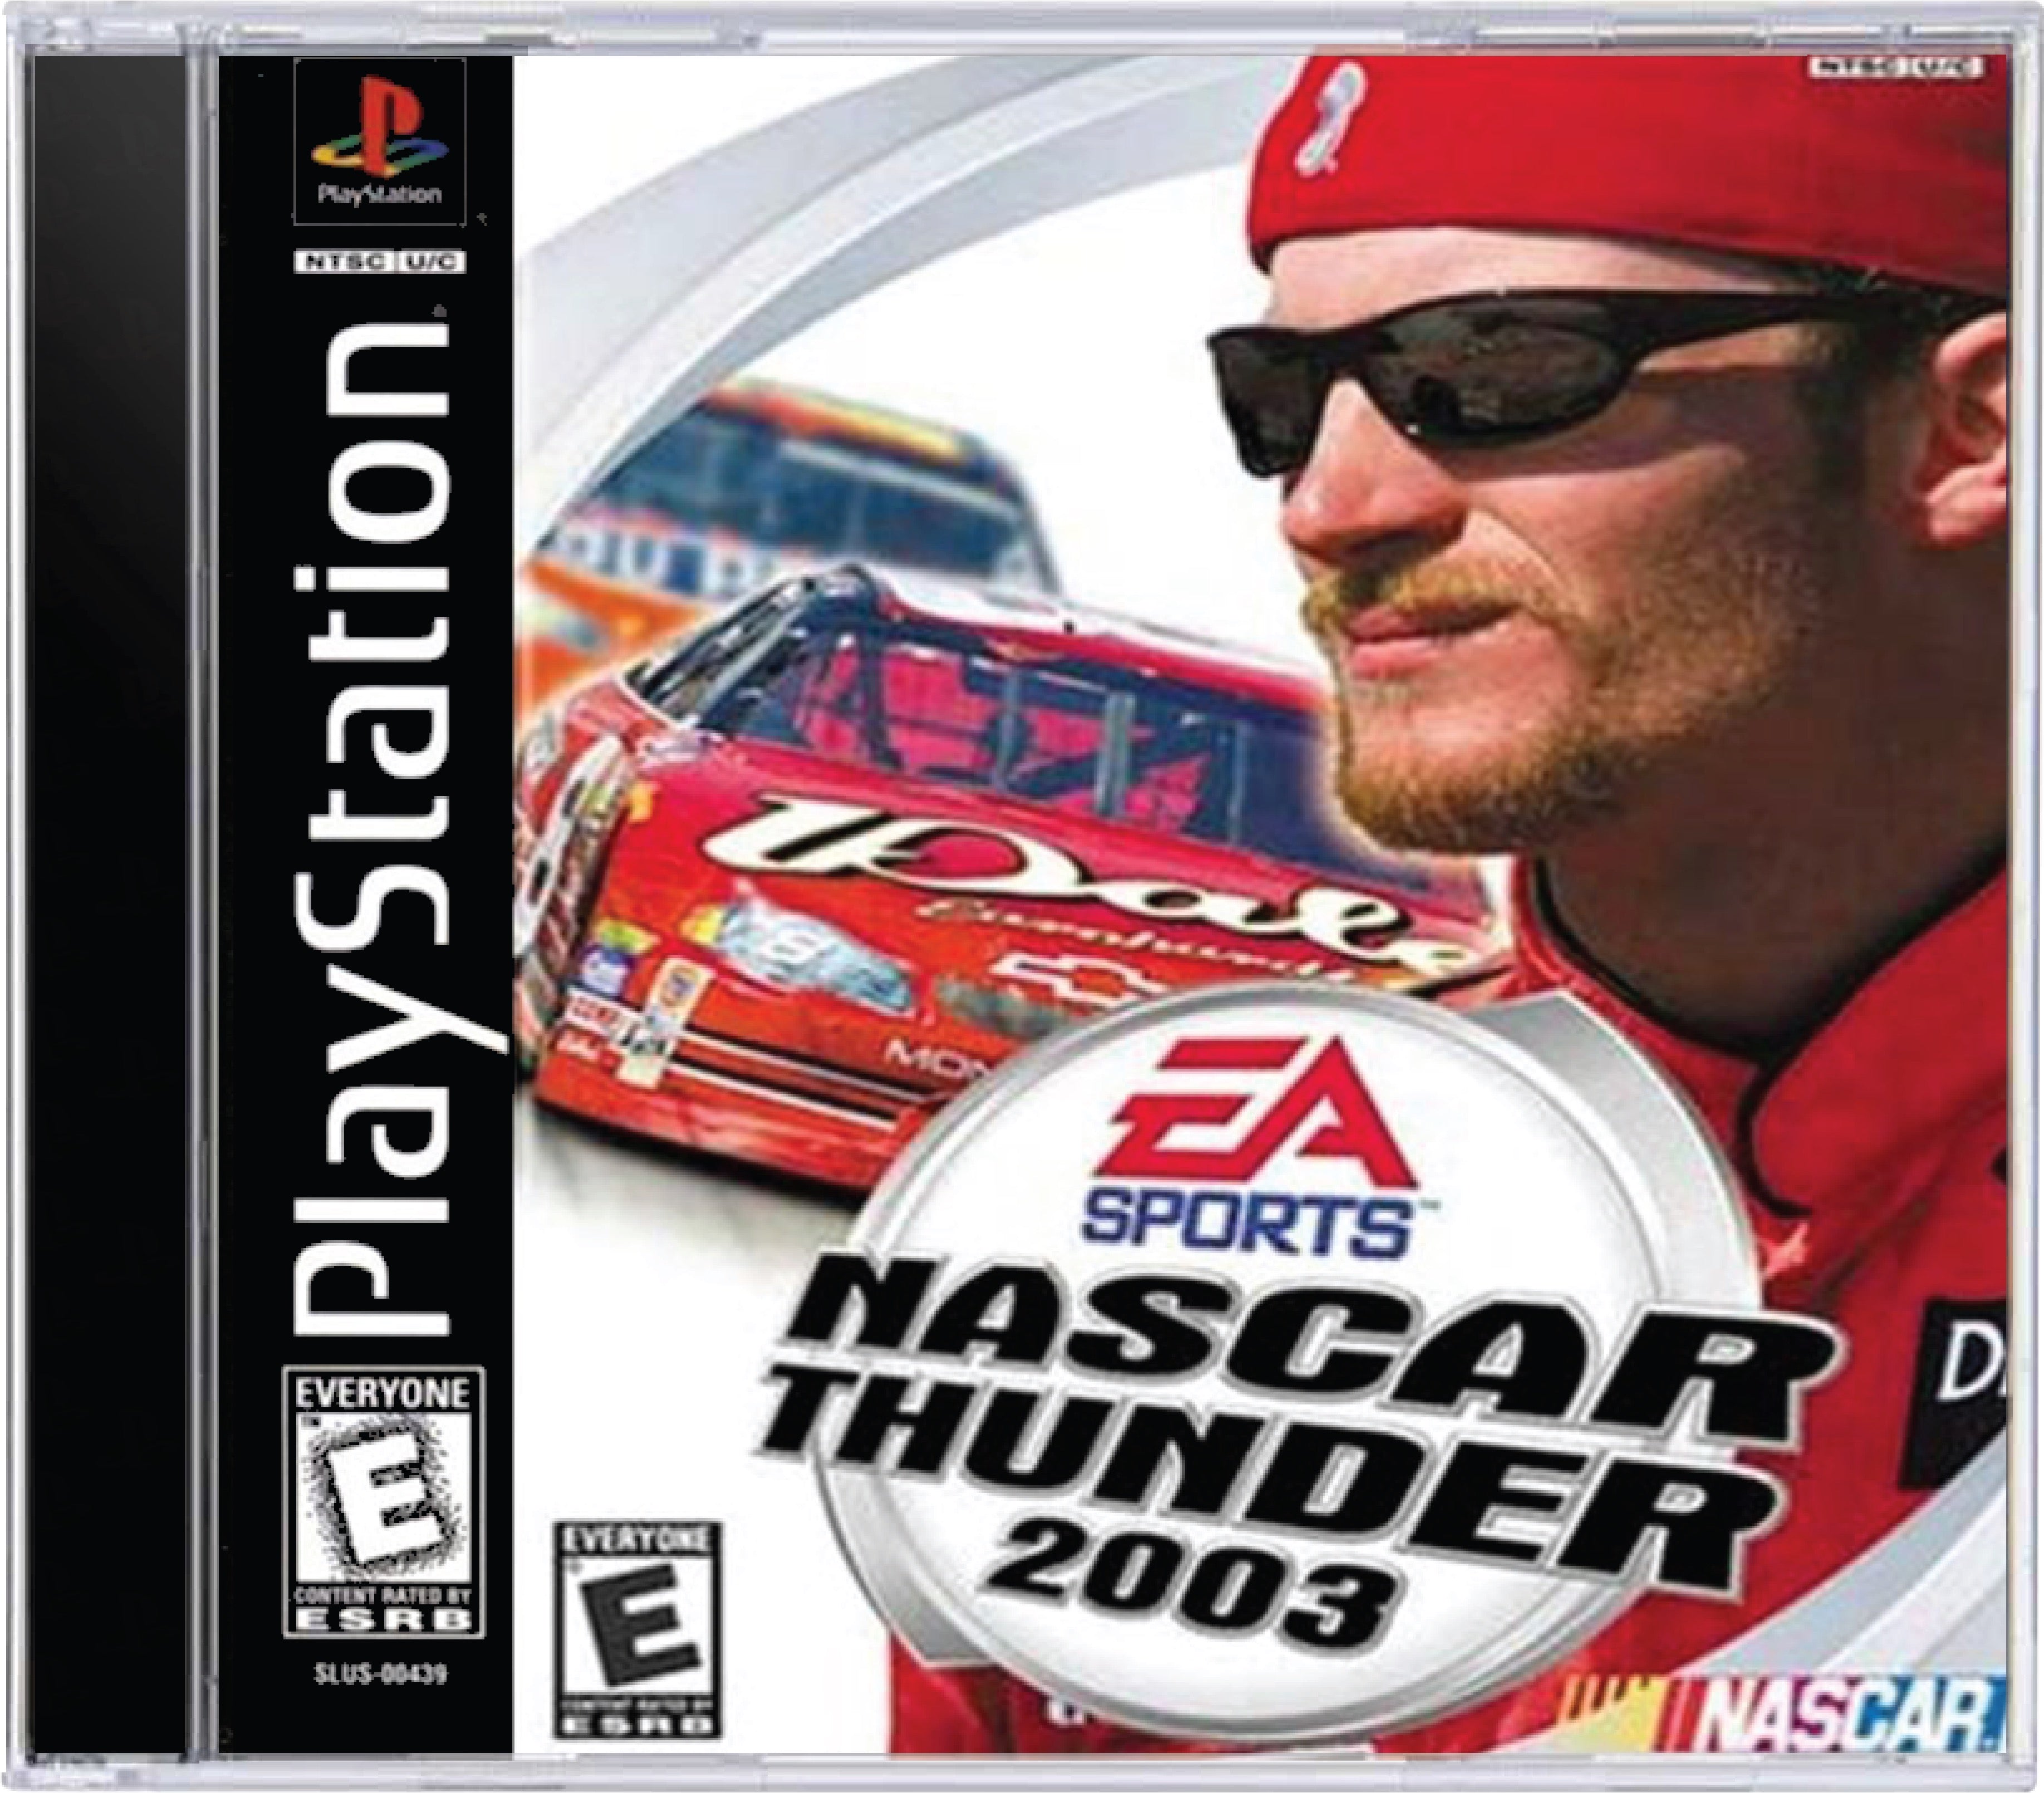 NASCAR Thunder 2003 Cover Art and Product Photo